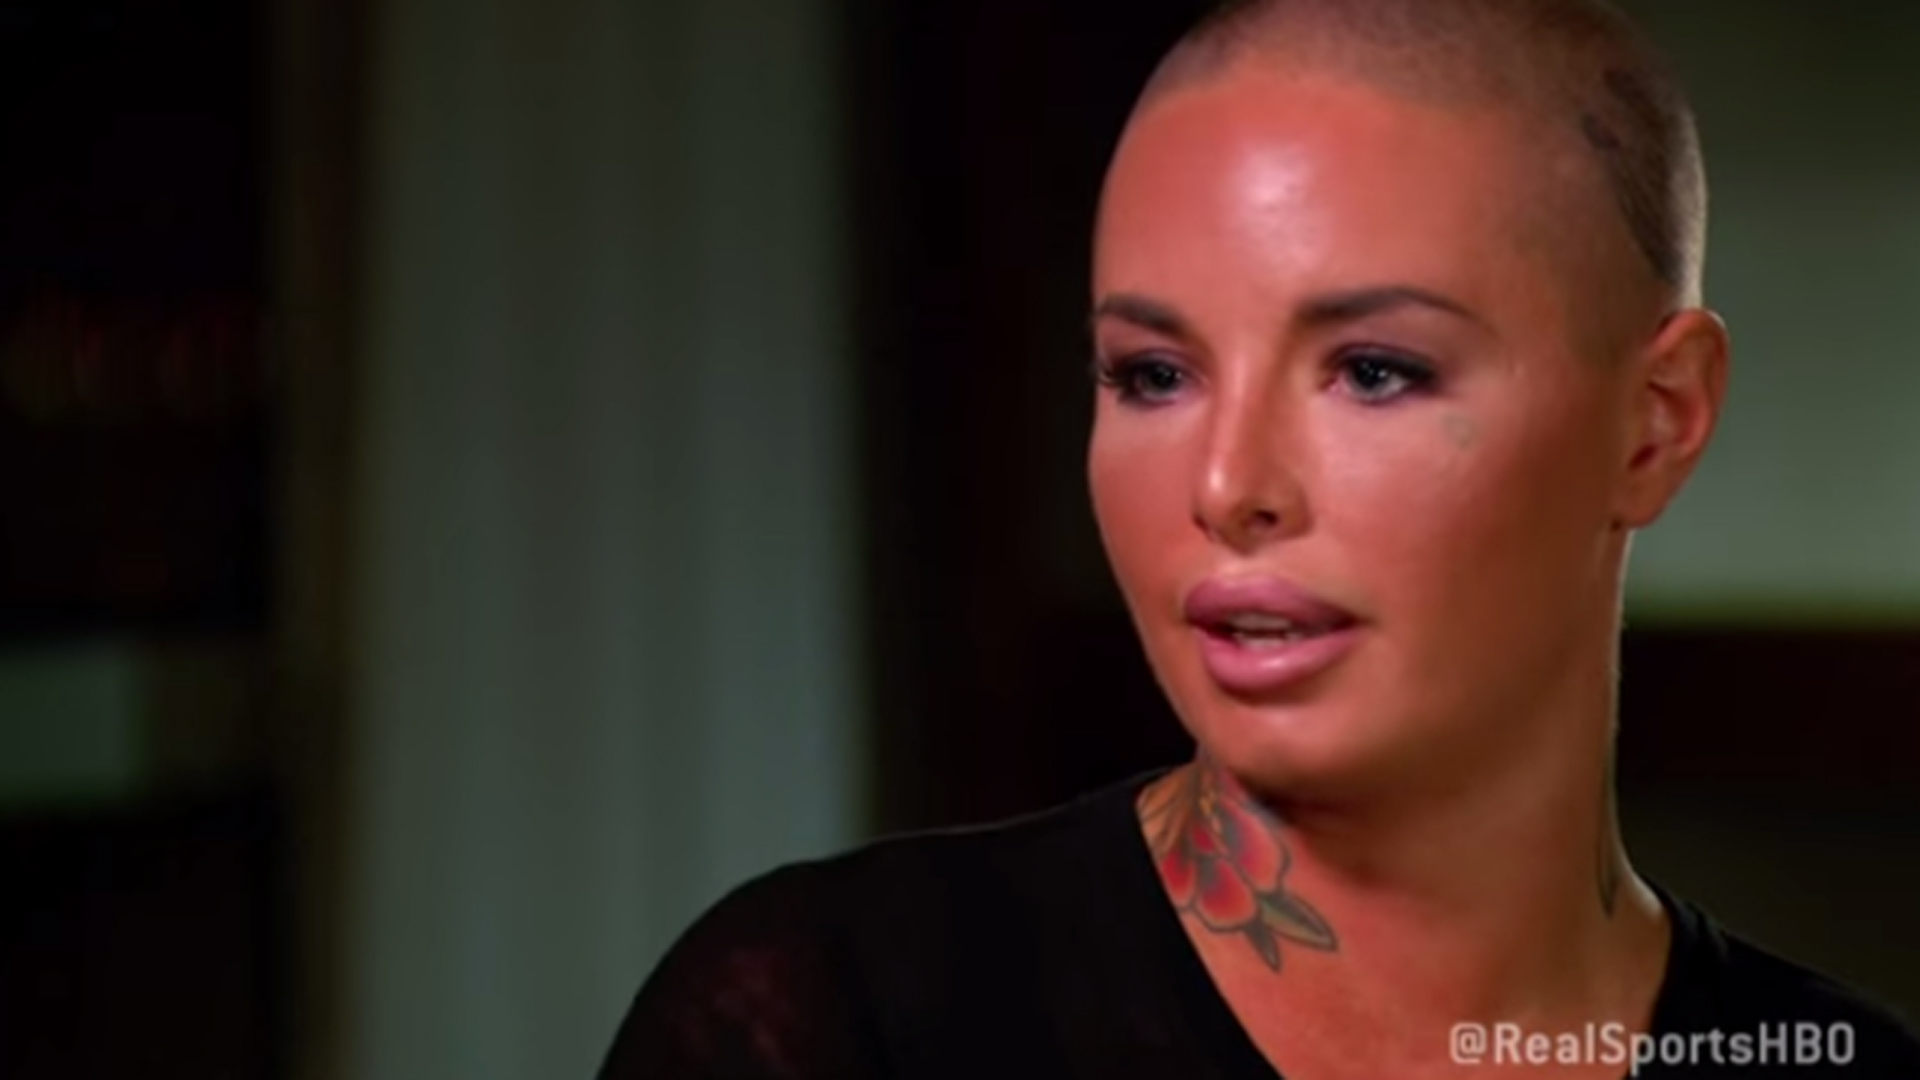 Christy Mack Details Horrific Attack From Mma Fighter In Gripping Hbo